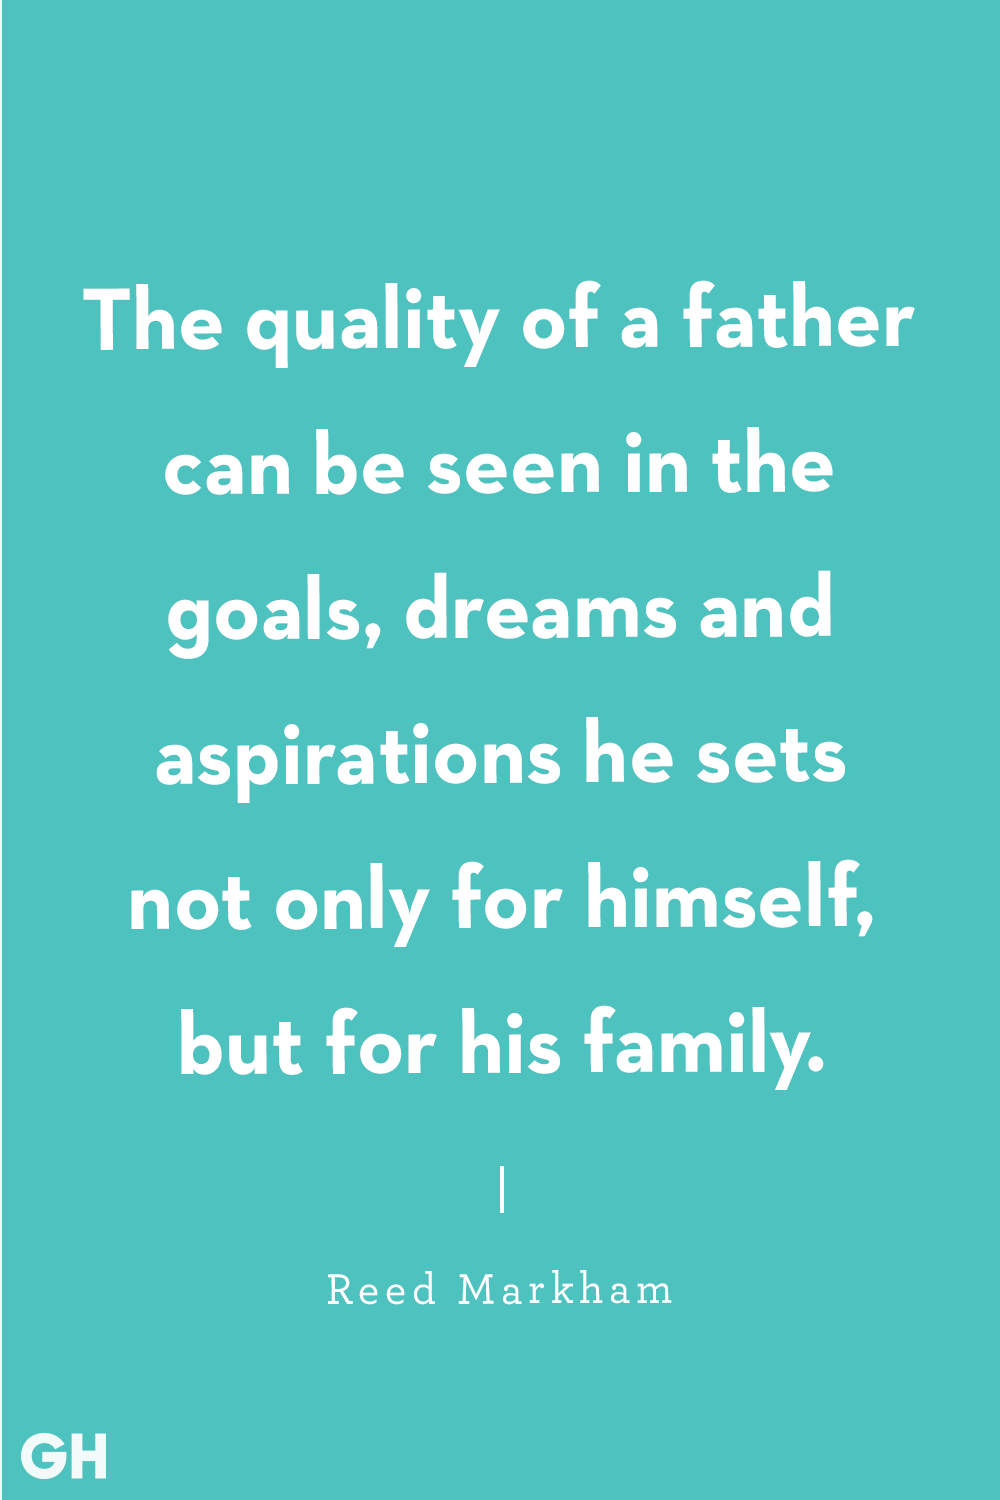 40 Best Father's Day Quotes - Happy 